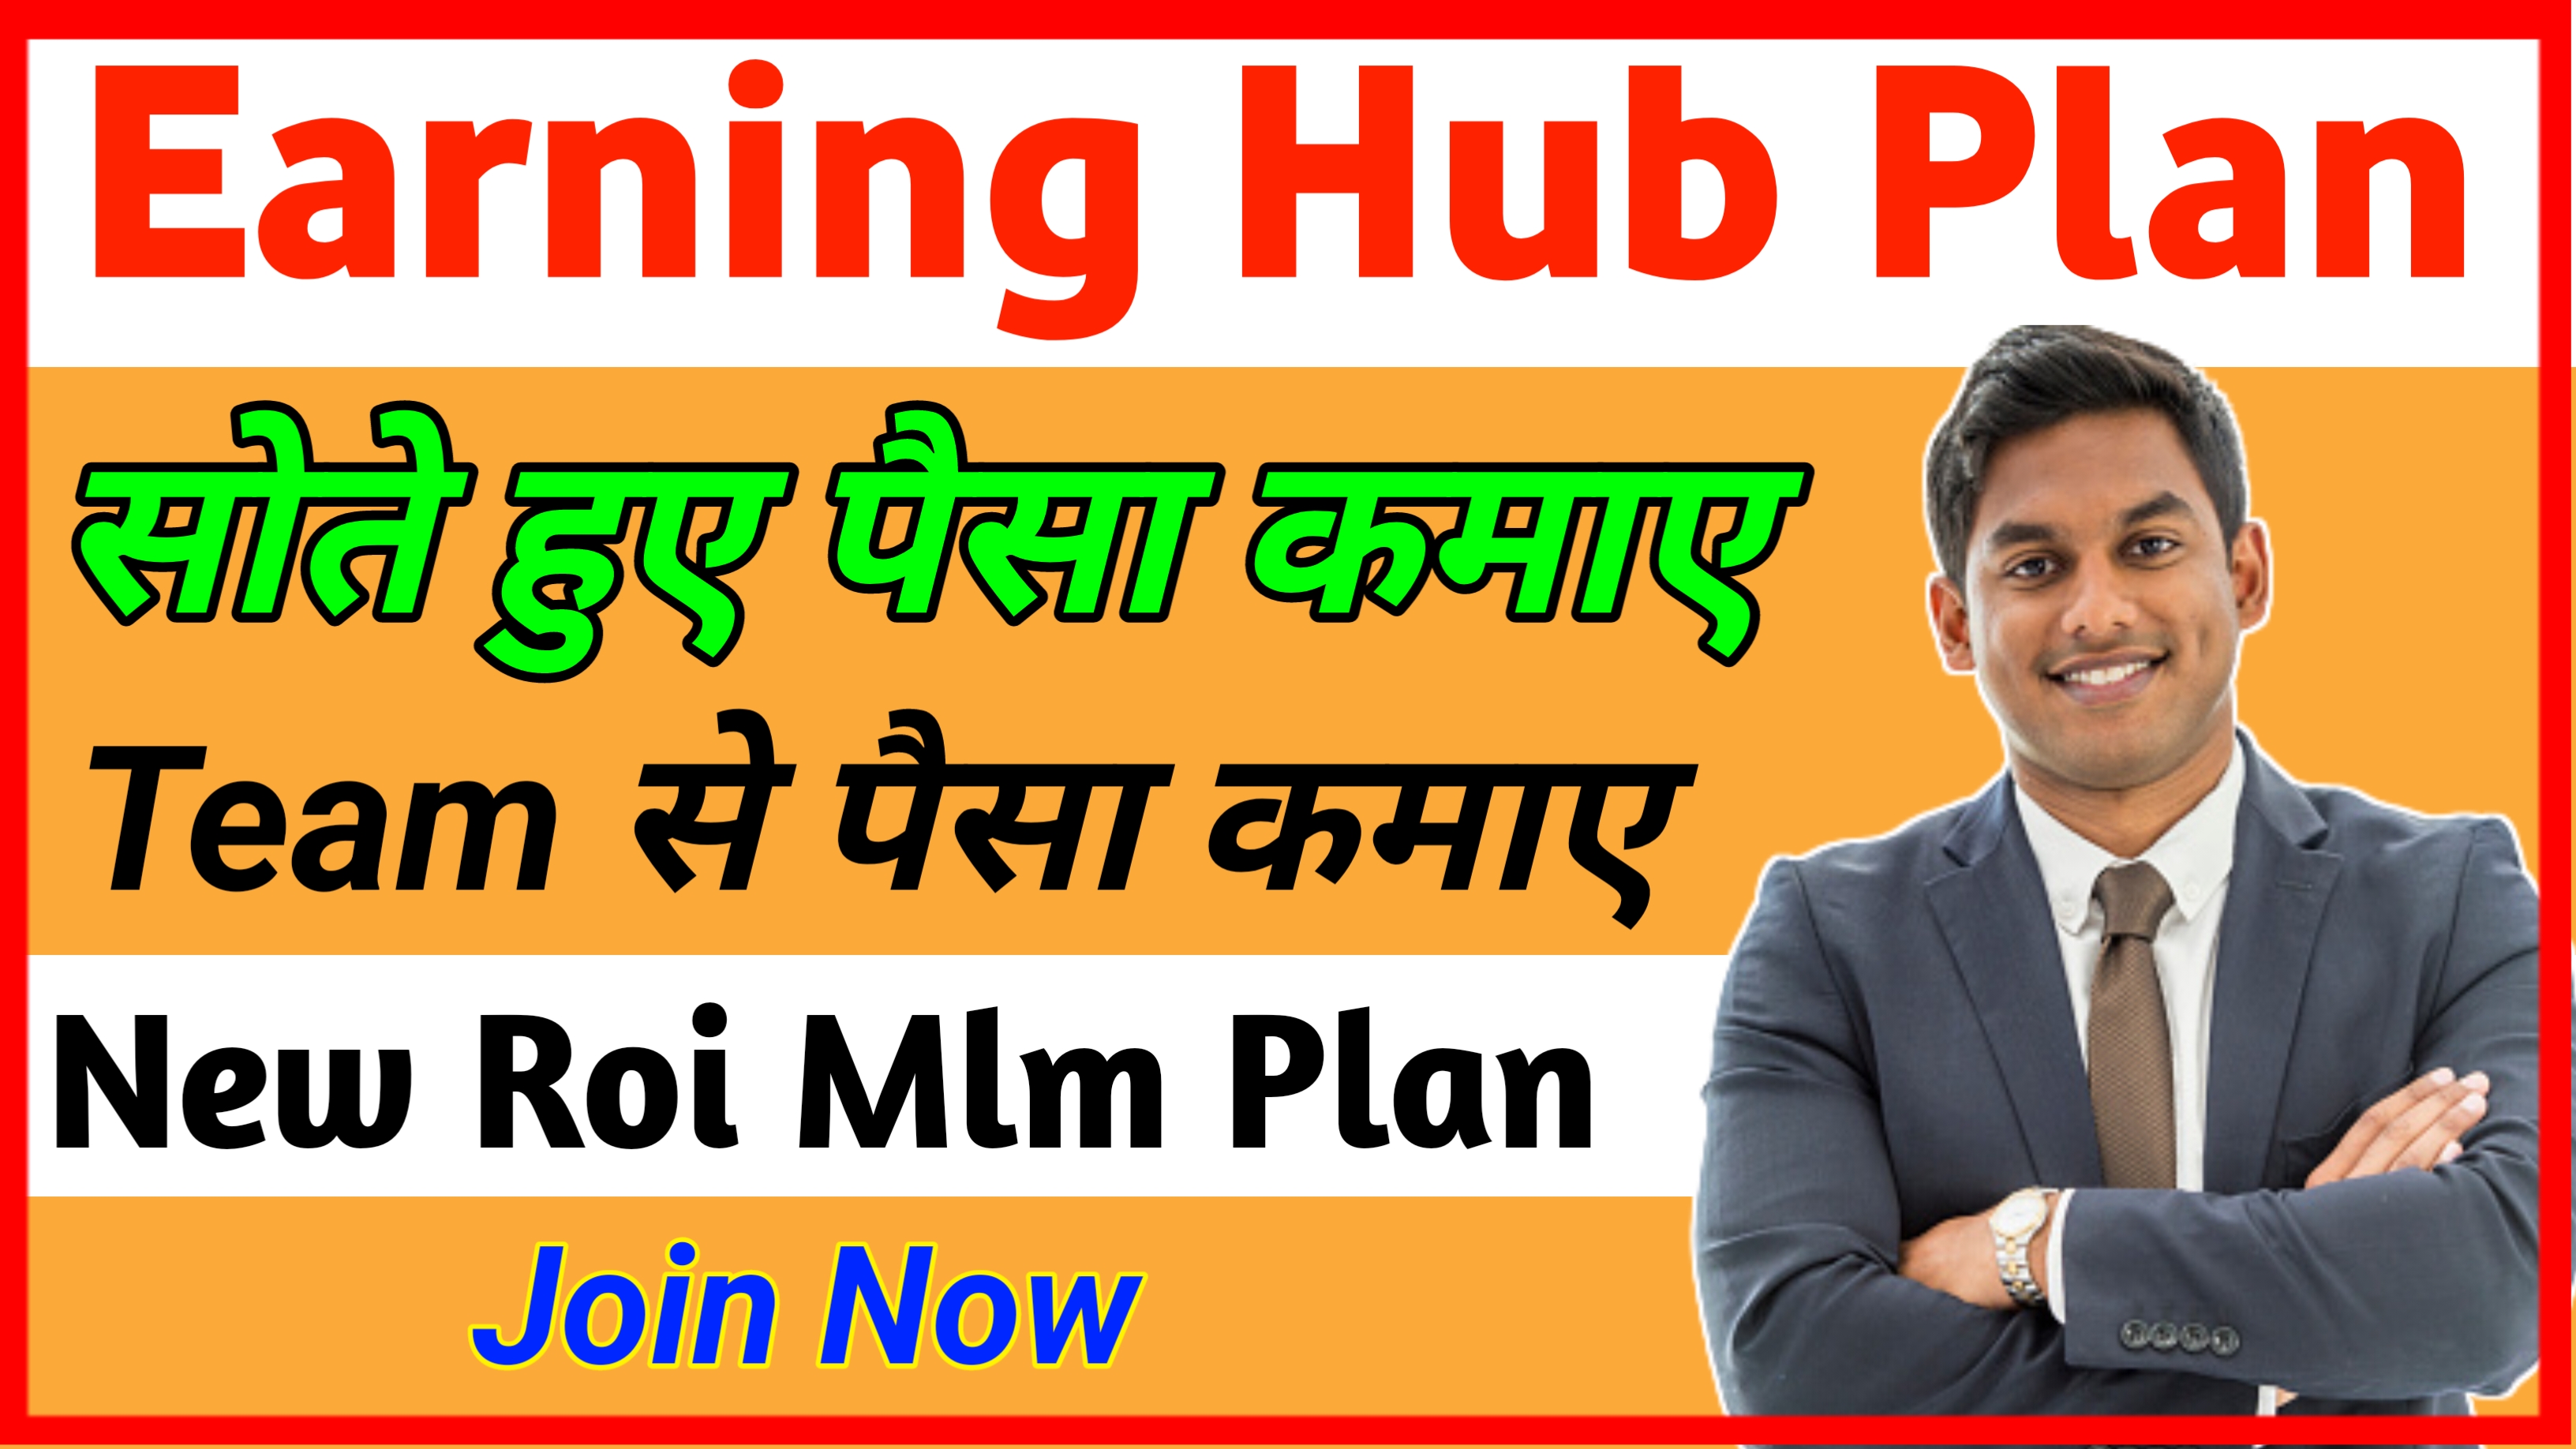 UNLIMITED EARN EVERY HOUR EVERYONE 24x7 WITH EARNING HUB